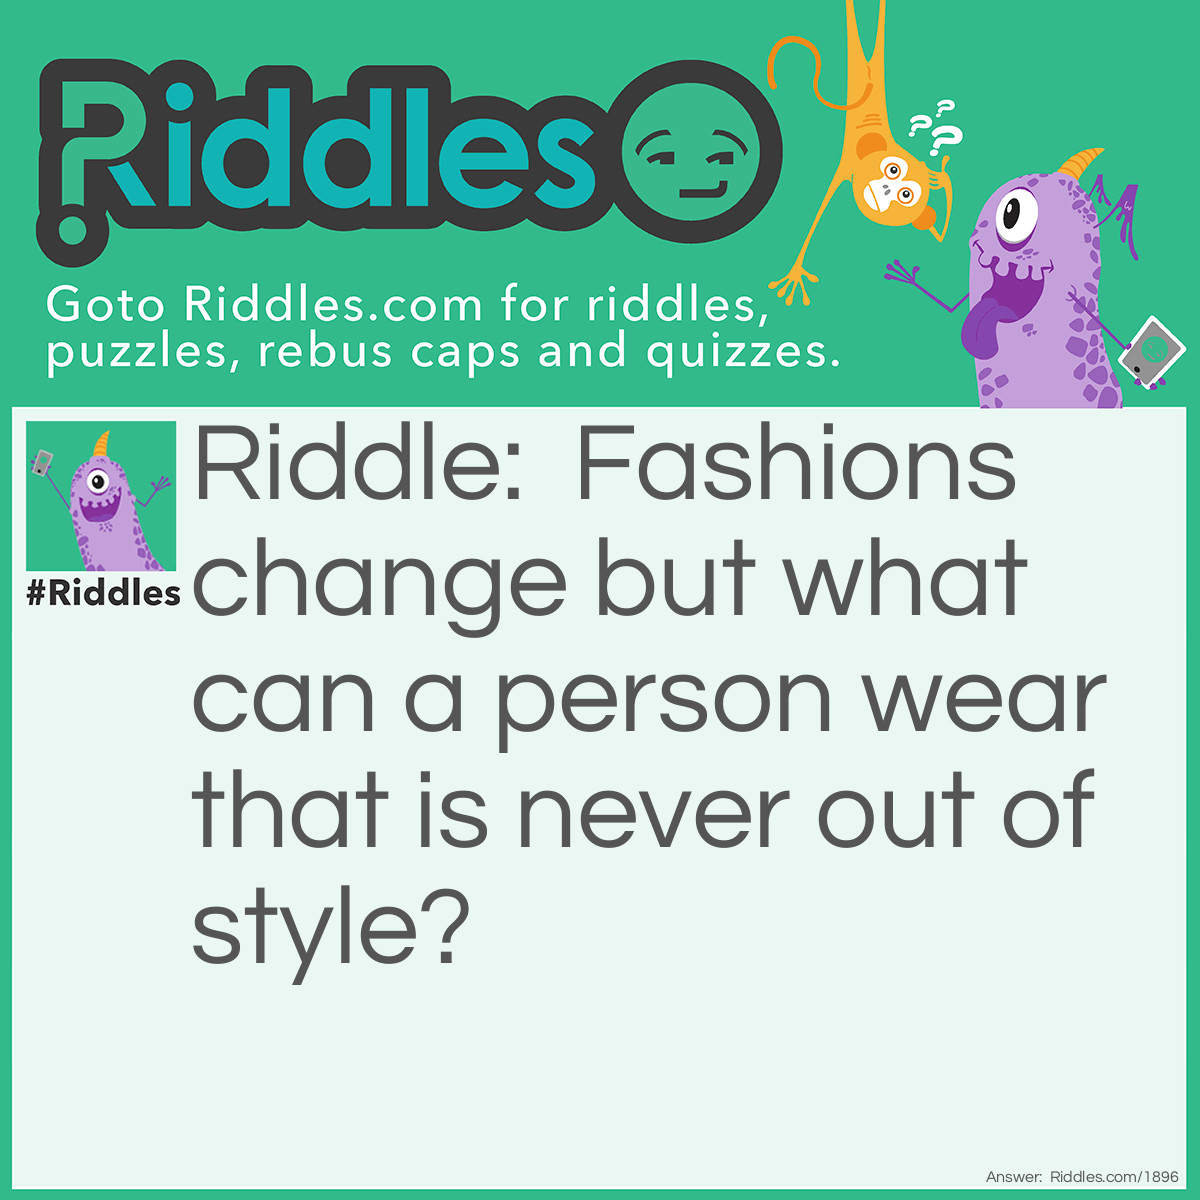 Riddle: Fashions change but what can a person wear that is never out of style? Answer: A smile.